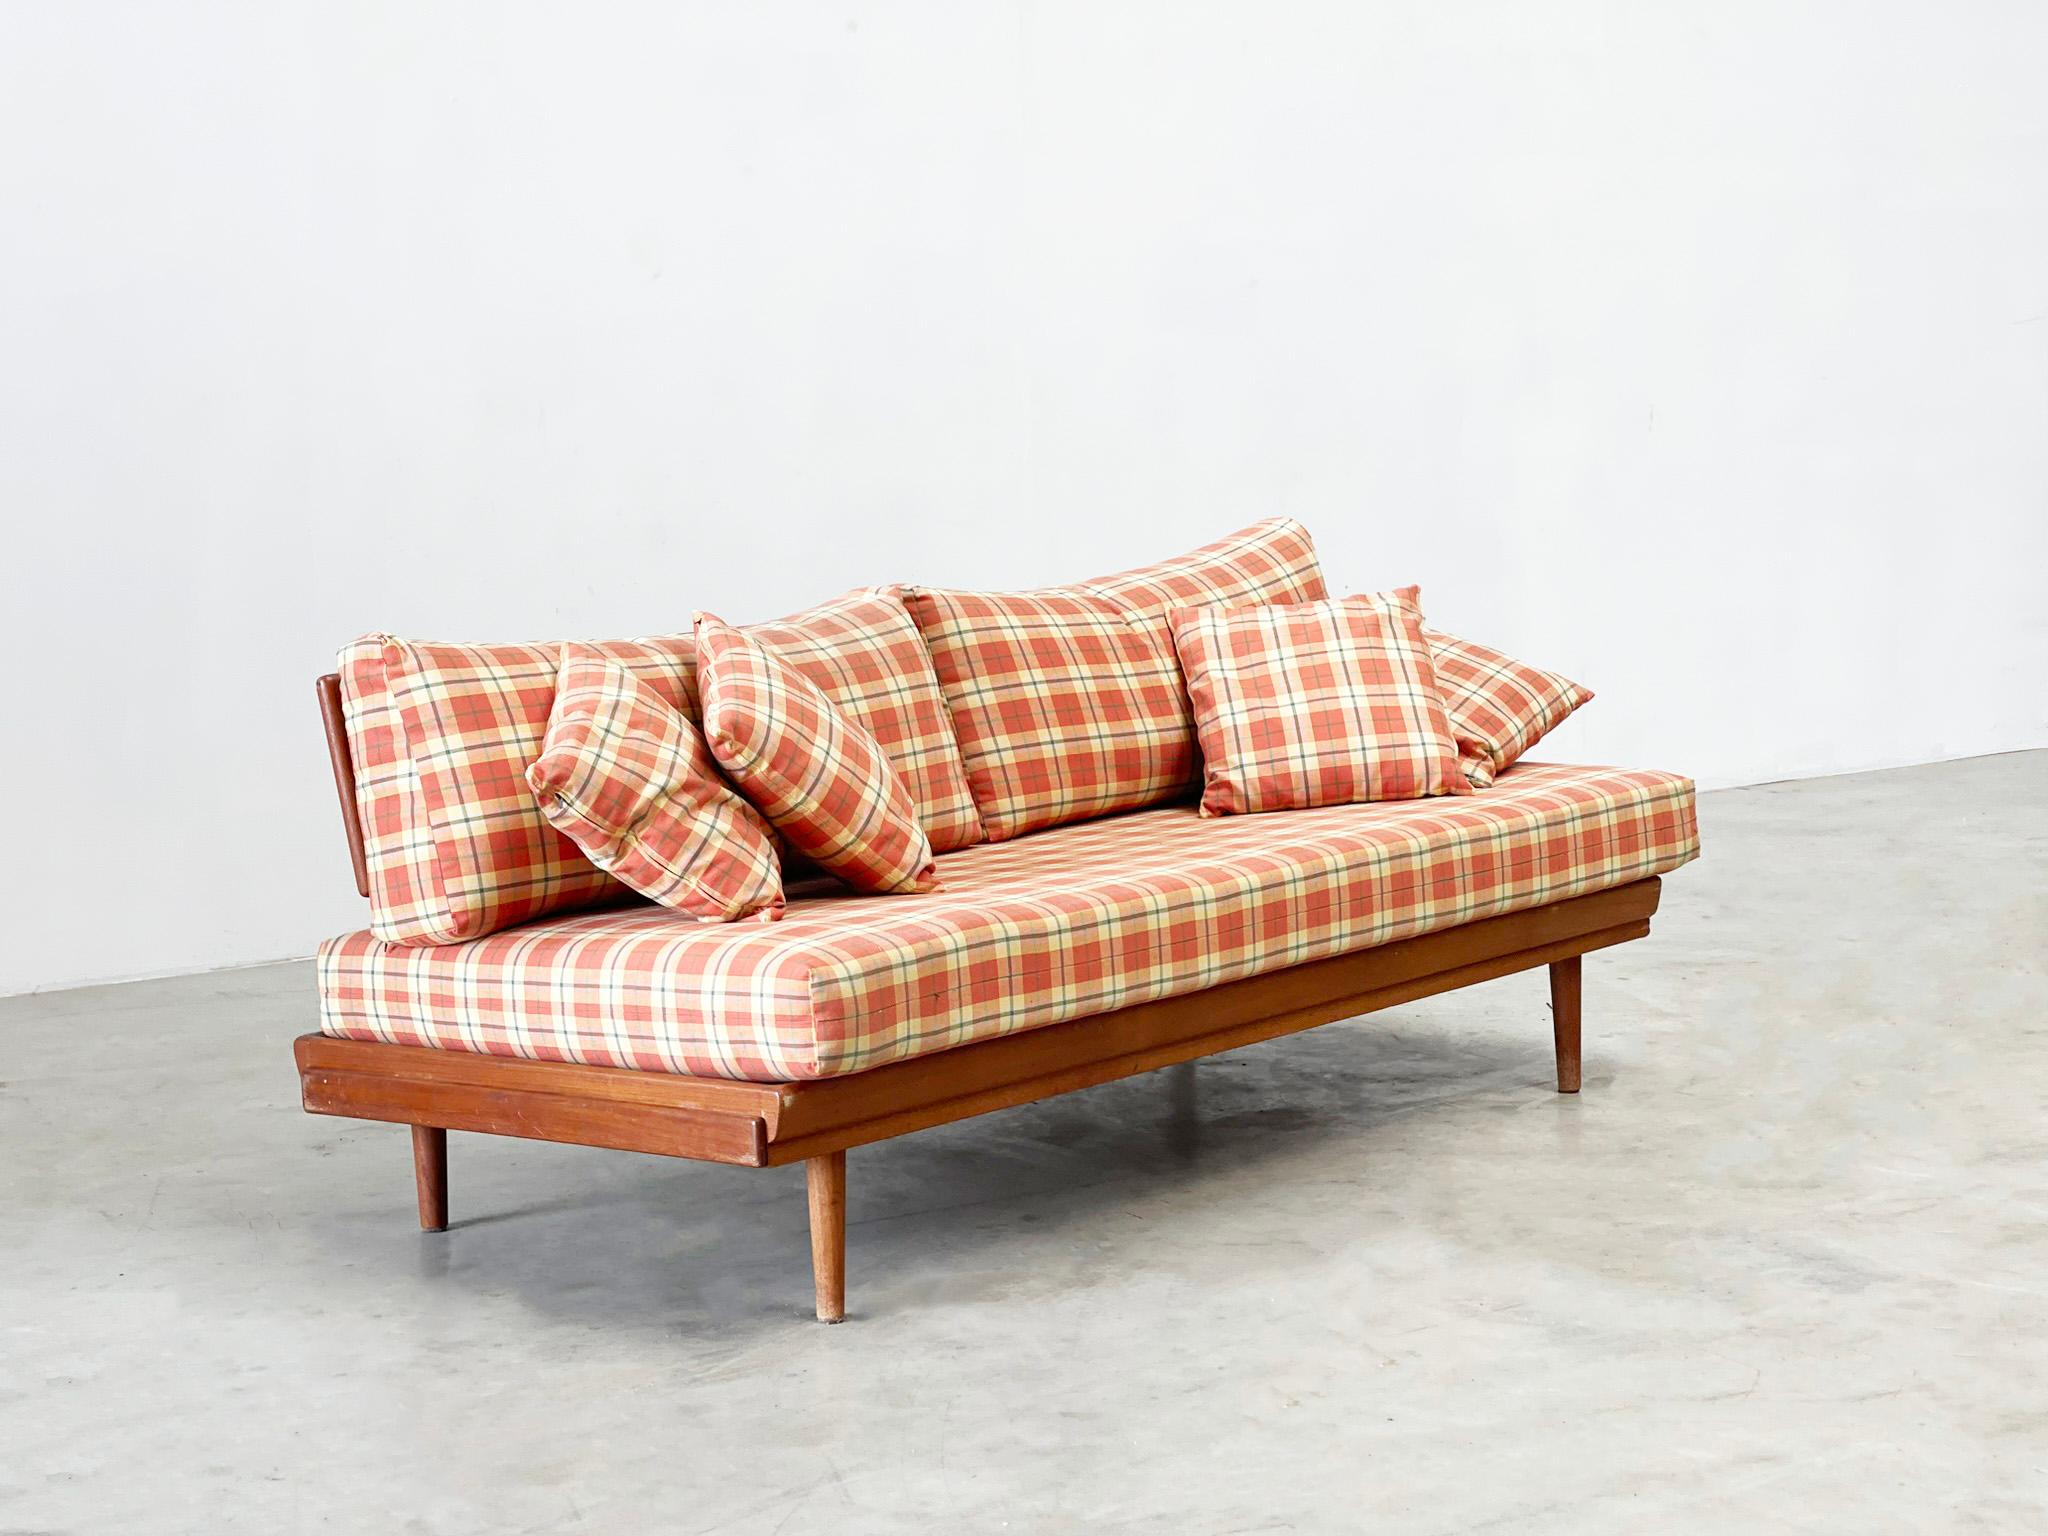 a piece of multifucntional furniture. This daybed or sofa bed was manufactured by Knoll in the 1960s. Knoll designed this piece of furniture to be versatile. It is a 3 seat sofa but if you remove the cushions you can turn it into a bed. This piece